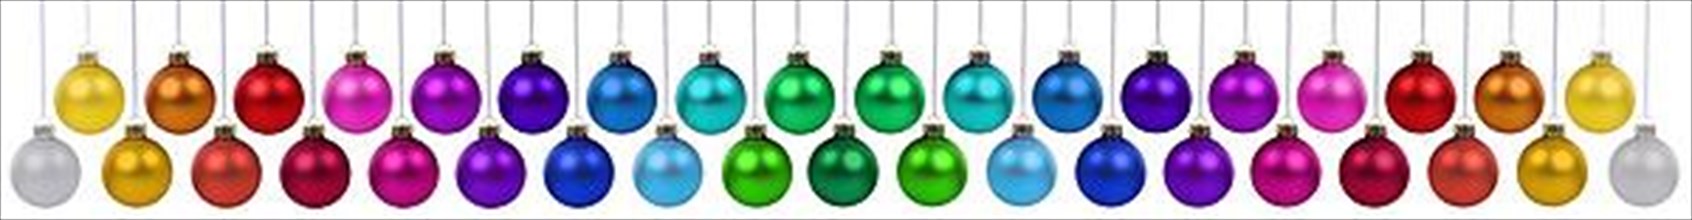 Christmas Many Christmas Balls Banners Christmas Balls Colours Decoration Hanging cut out Isolated Deco